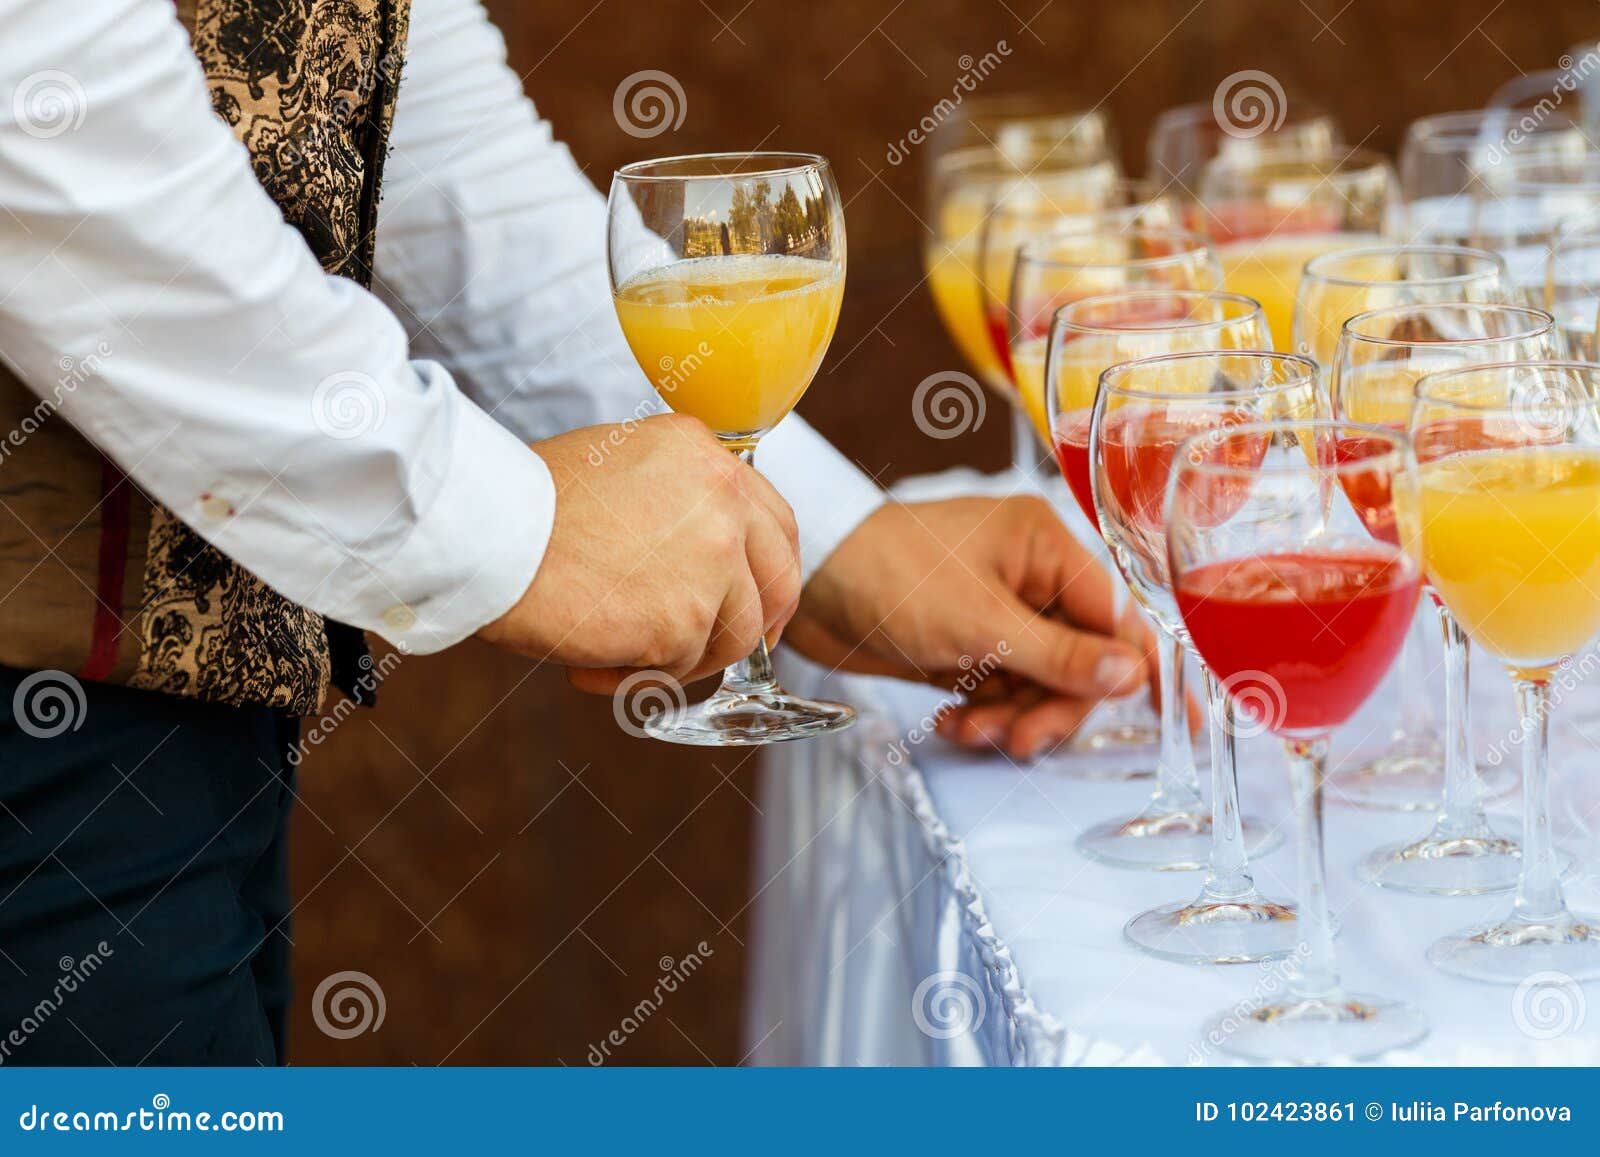 Glasses In A Row At A Buffet Table Stock Image Image Of Restaurant Celebration 102423861